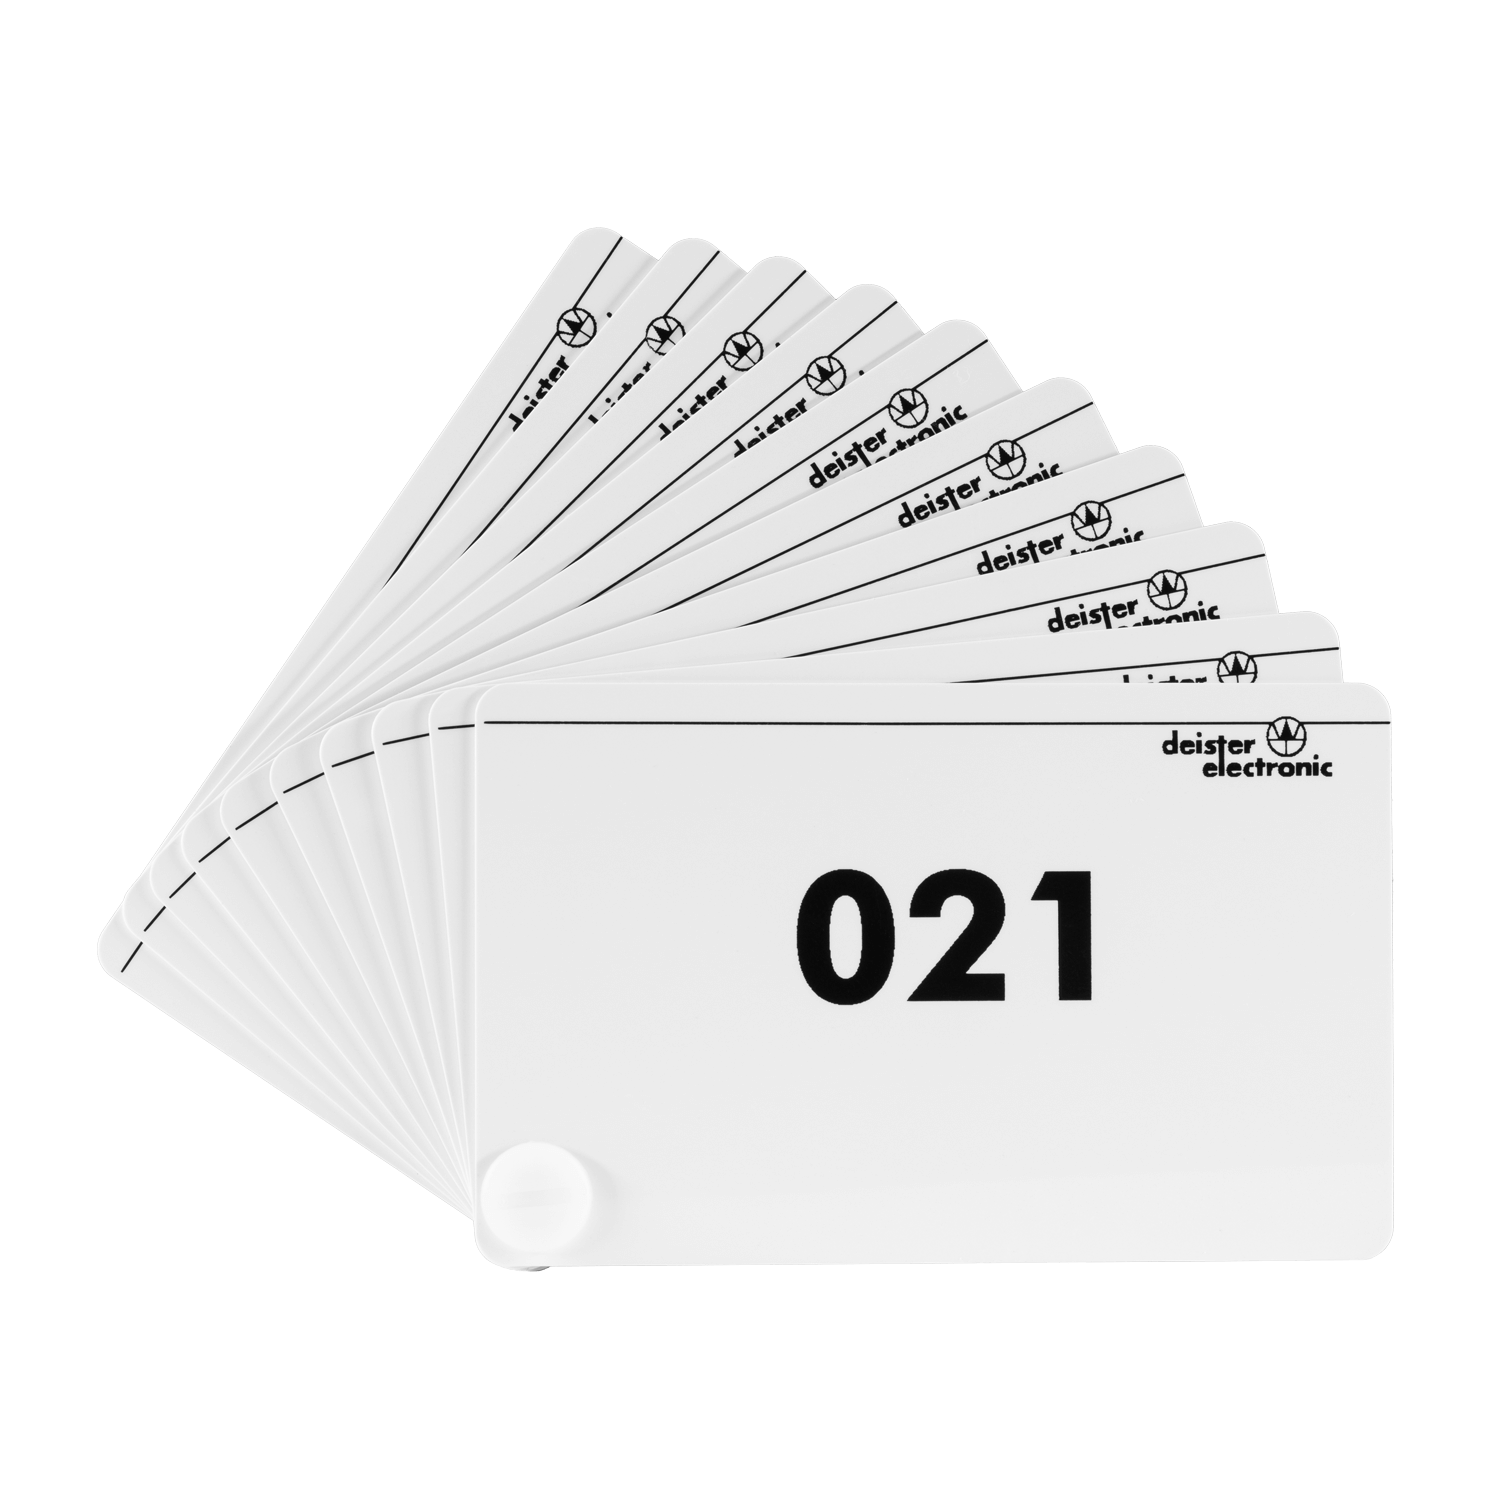 Event cards for various events during control rounds. Compact and clearly organized as card compartments